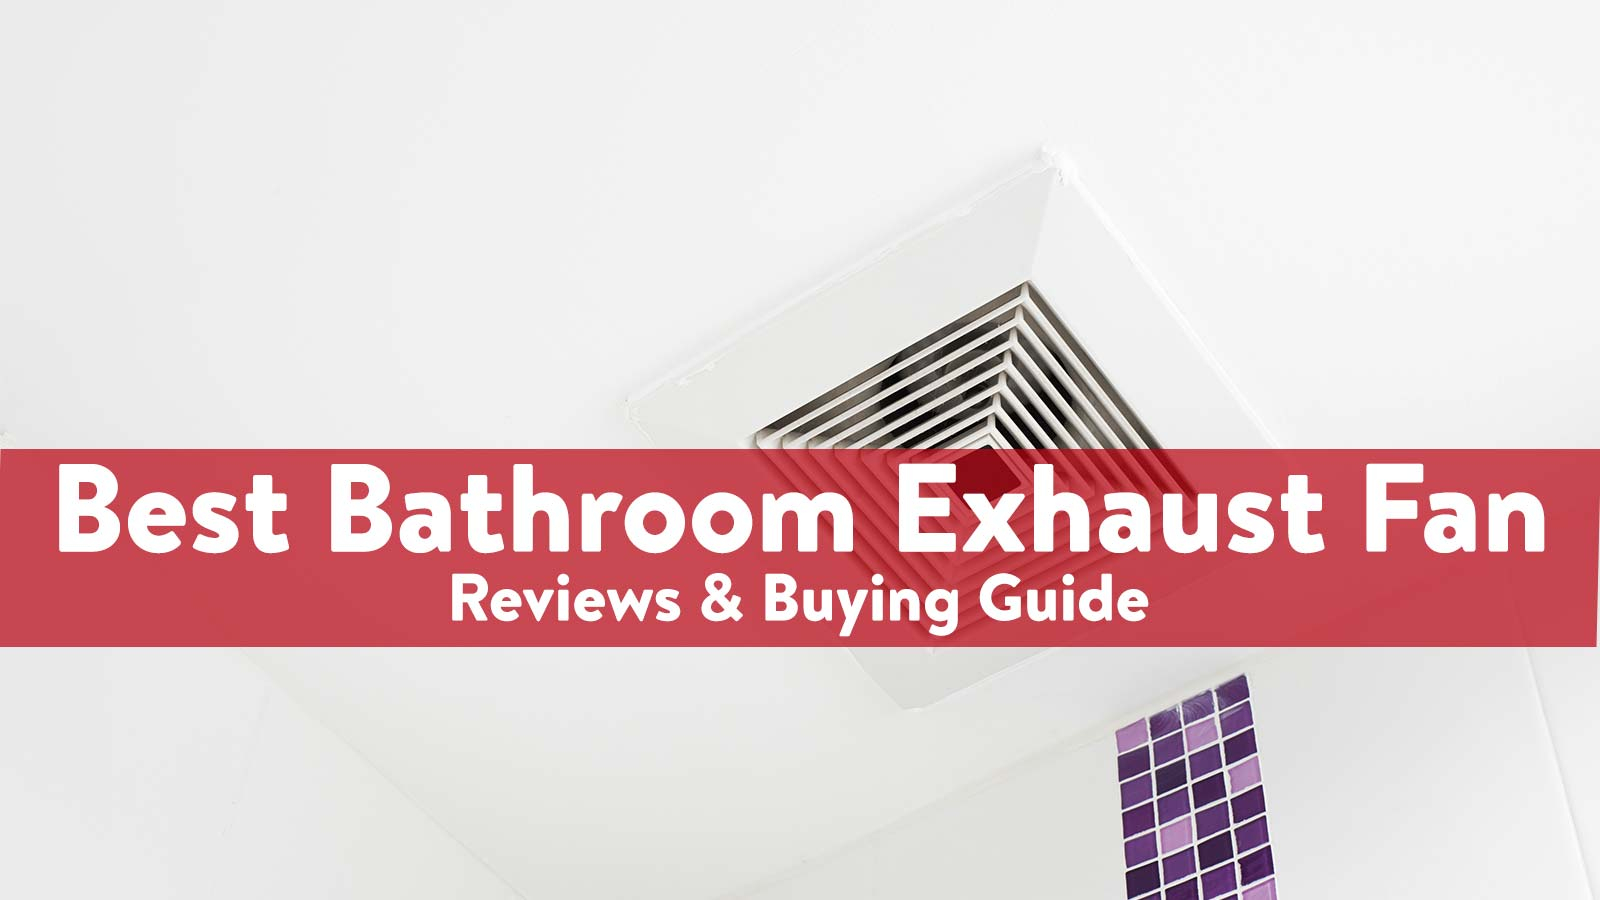 10 Best Bathroom Exhaust Fans Reviews Buying Guide 2020 intended for proportions 1600 X 900